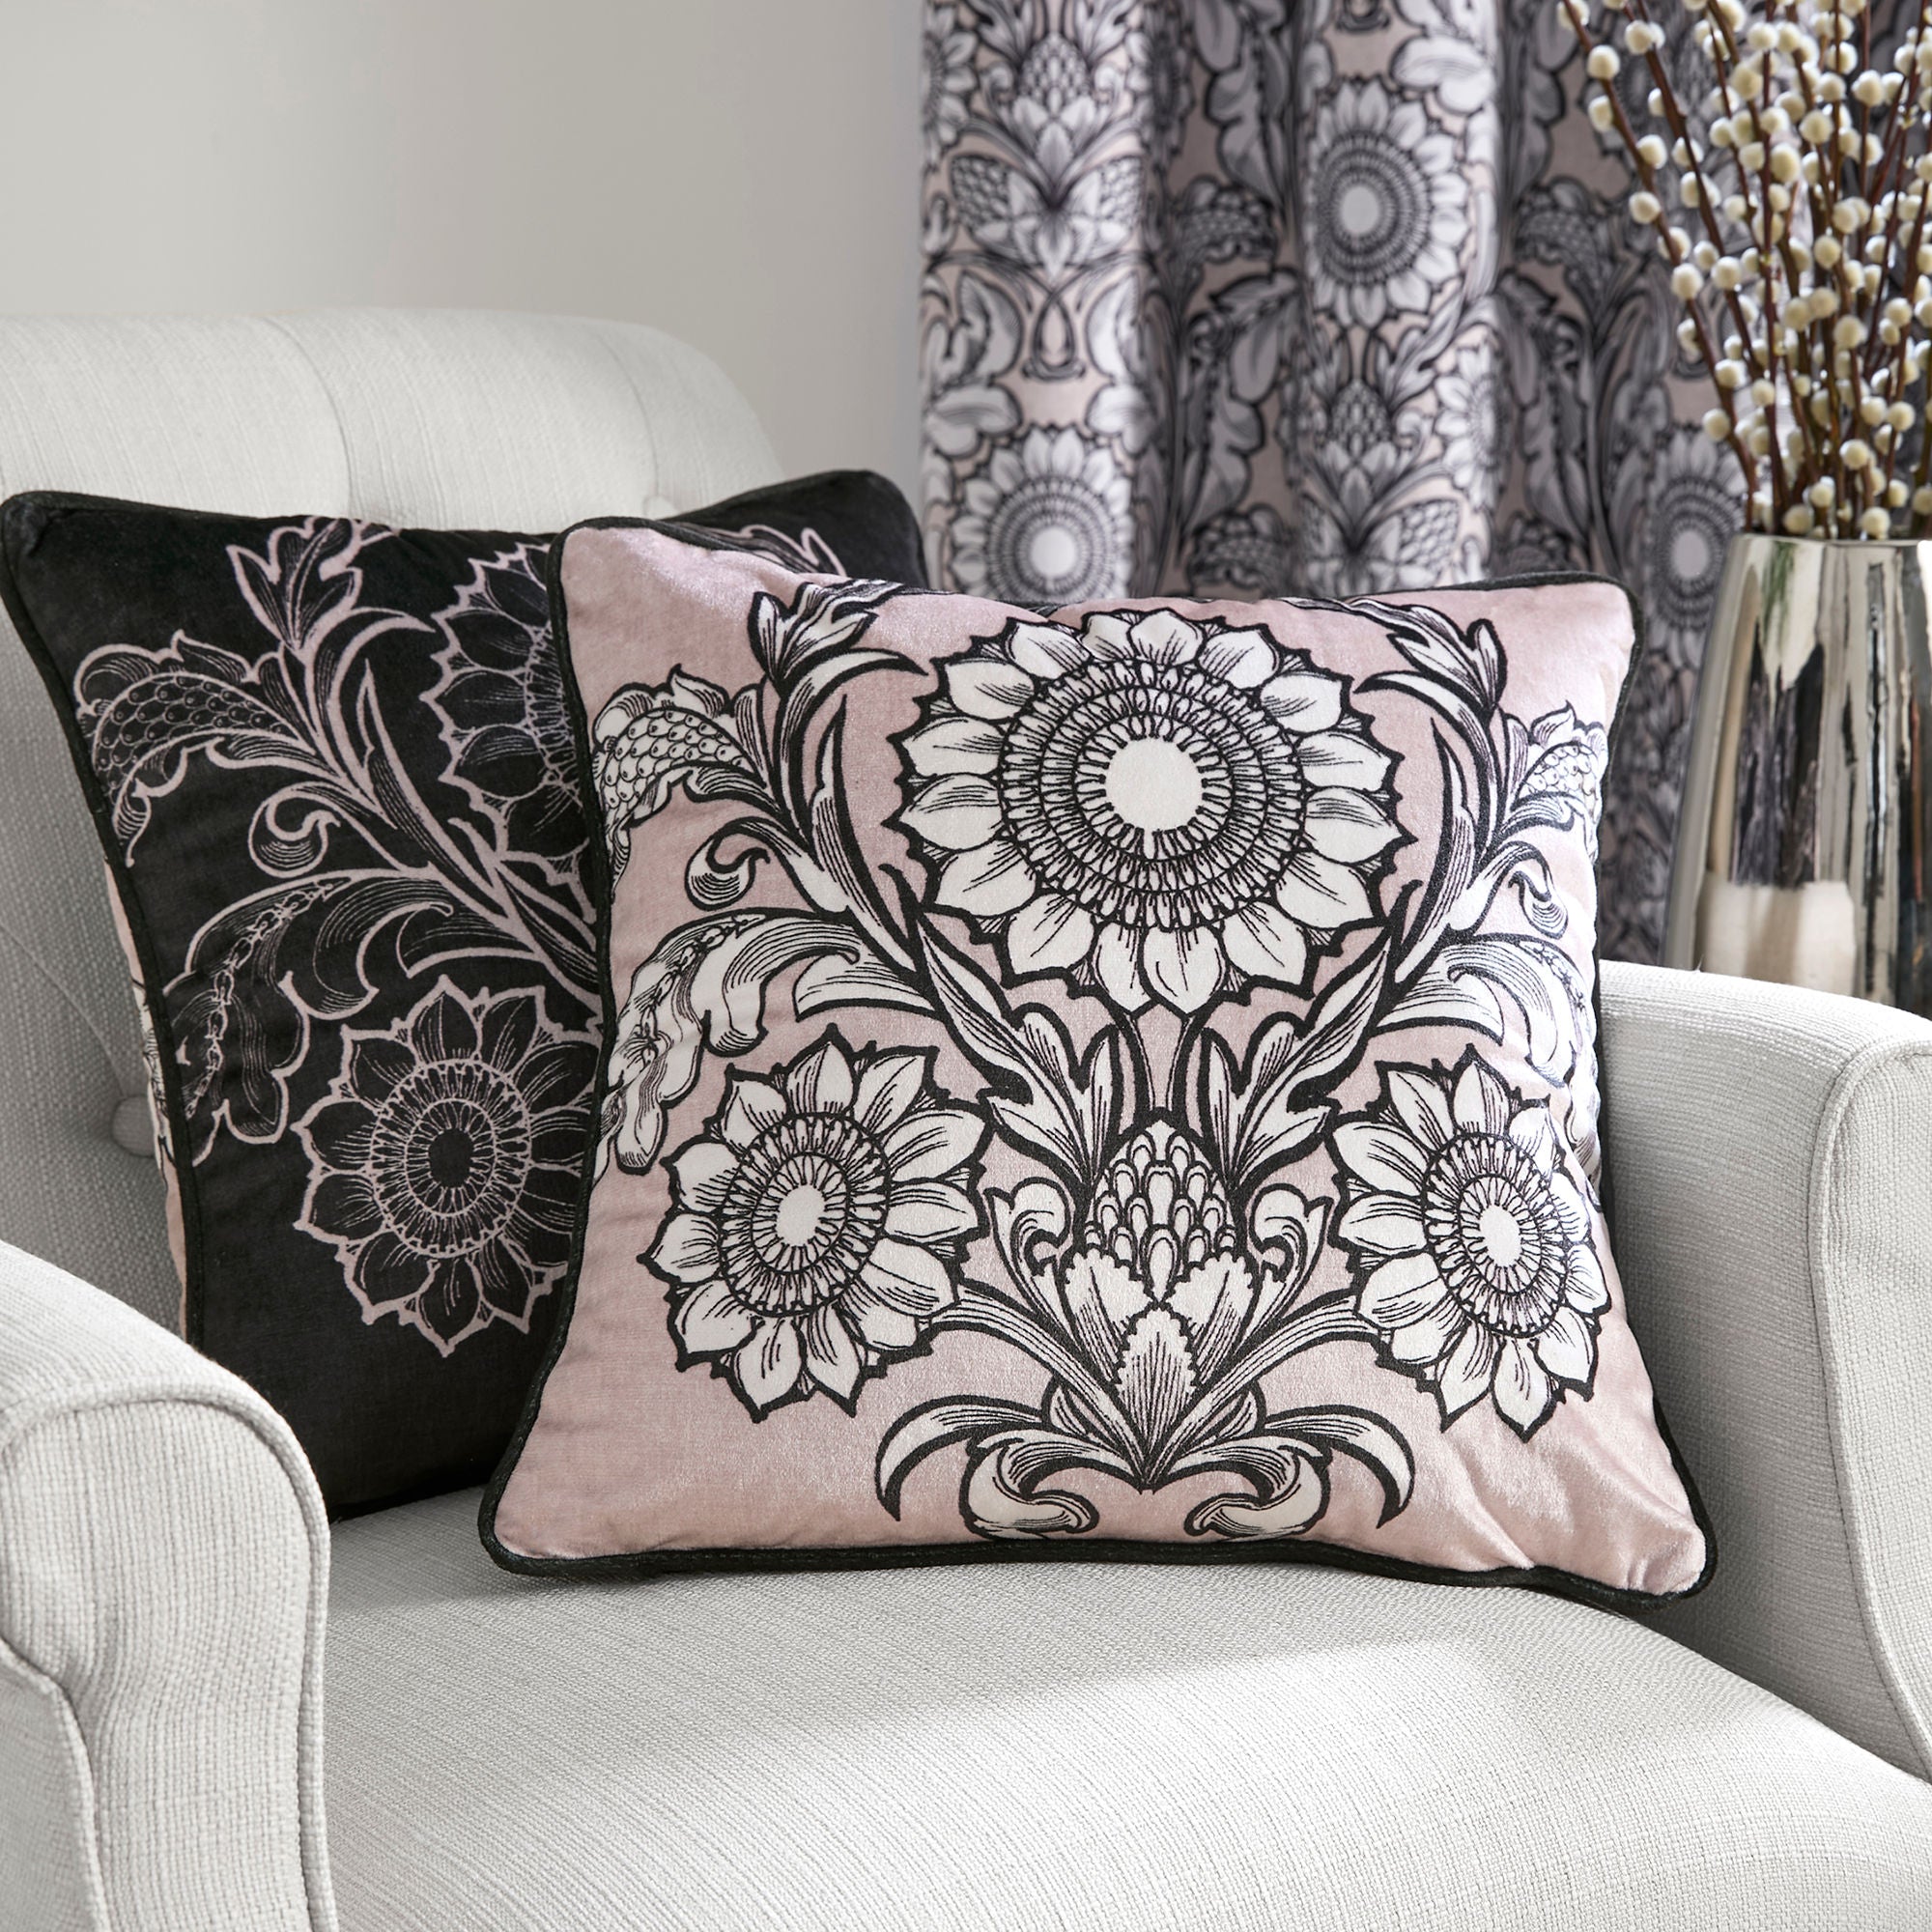 Romilly Cushion by Laurence Llewelyn-Bowen in Natural 43 x 43cm - Cushion - Laurence Llewelyn-Bowen